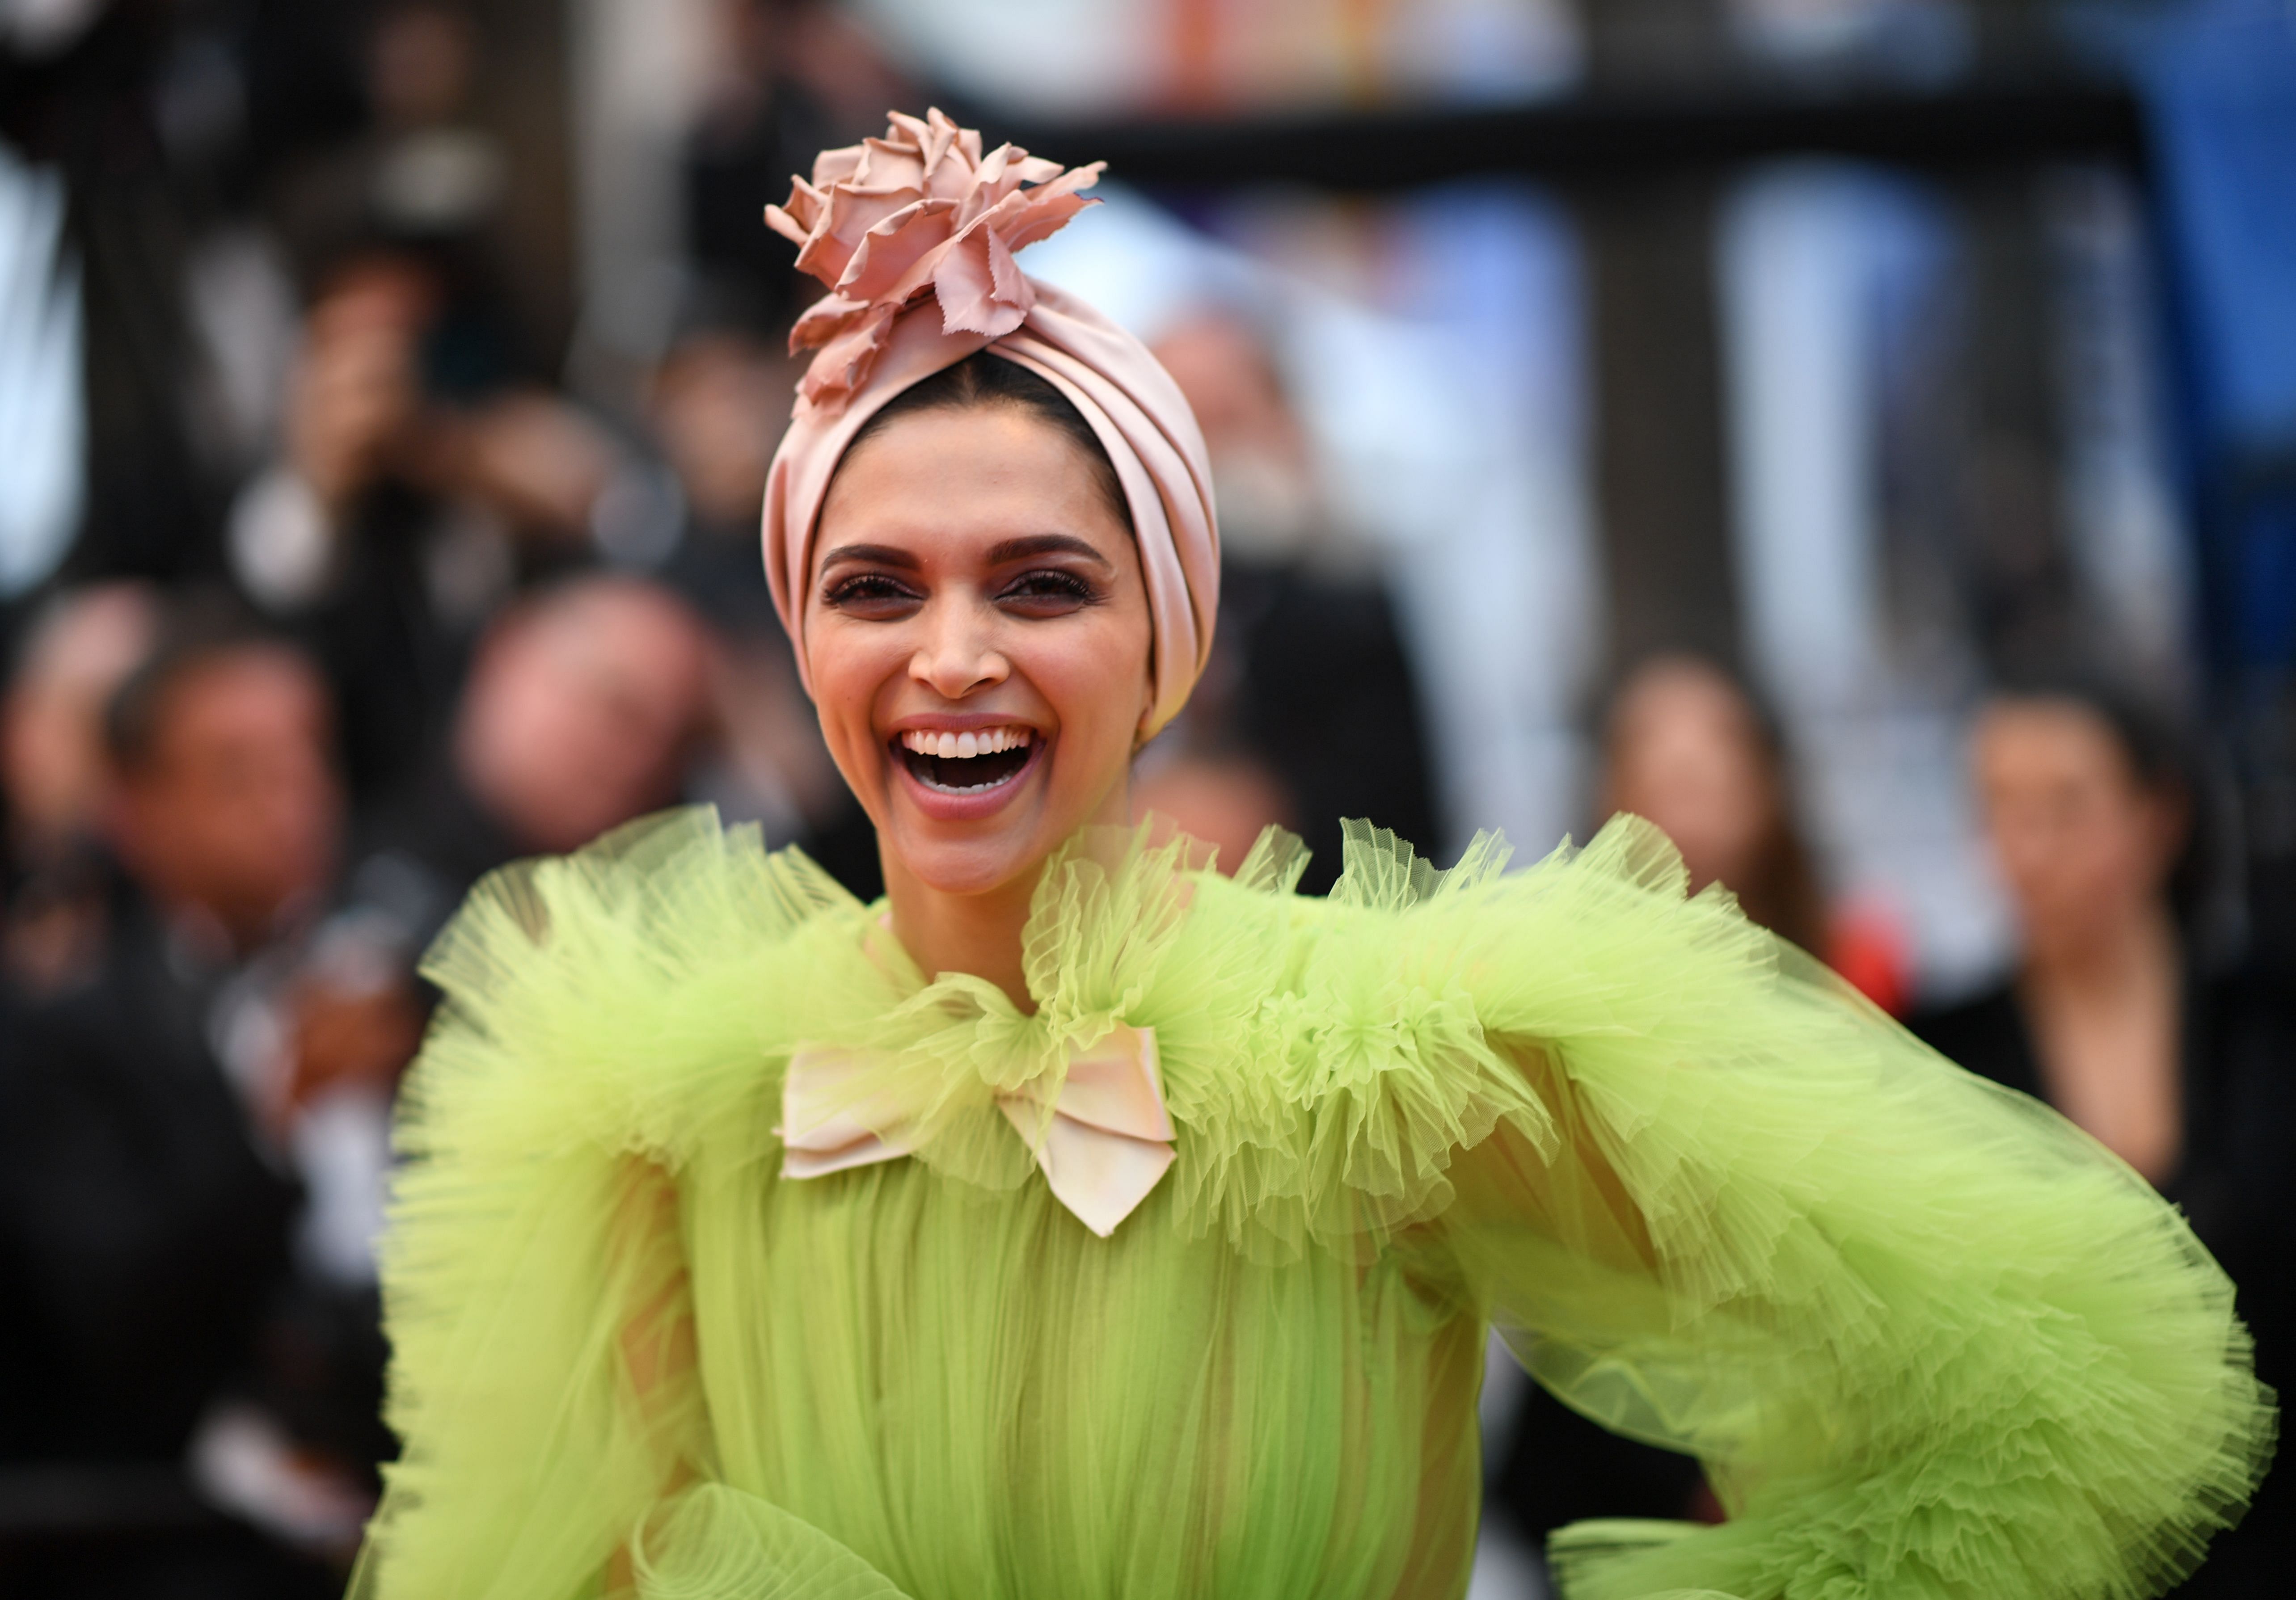 Indian actress Deepika Padukone poses as she arrives for the screening of the film "Dolor Y Gloria (Pain and Glory)" at the 72nd edition of the Cannes Film Festival in Cannes, southern France. (AFP Photo)